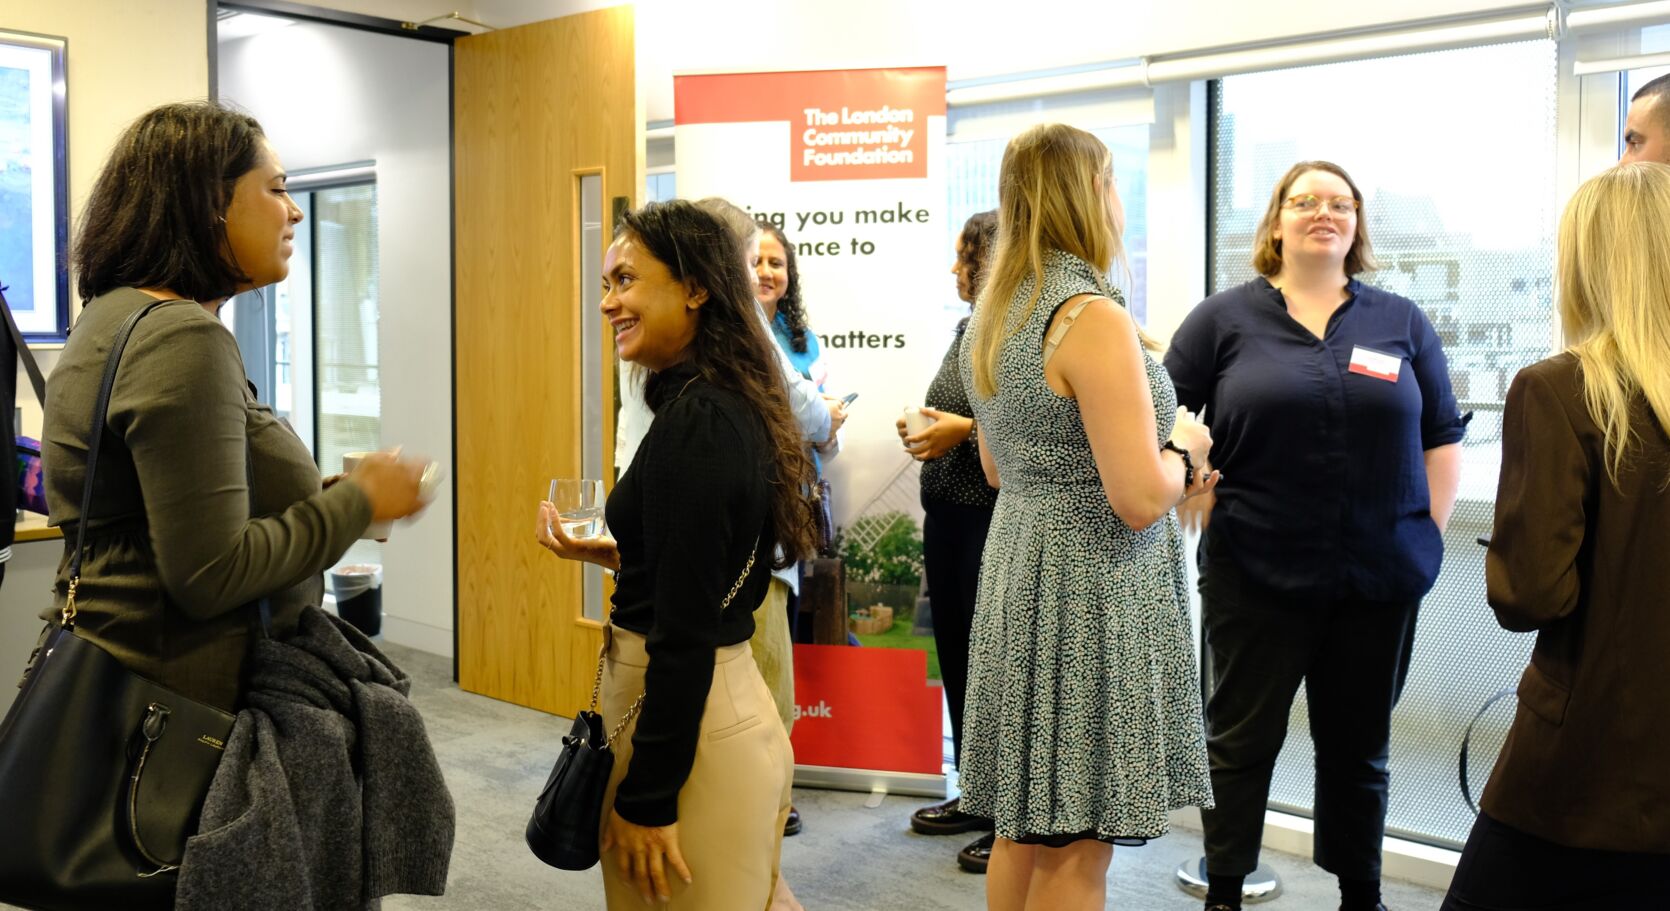 A group of people talking together over refreshments at the Women's Fund for London event